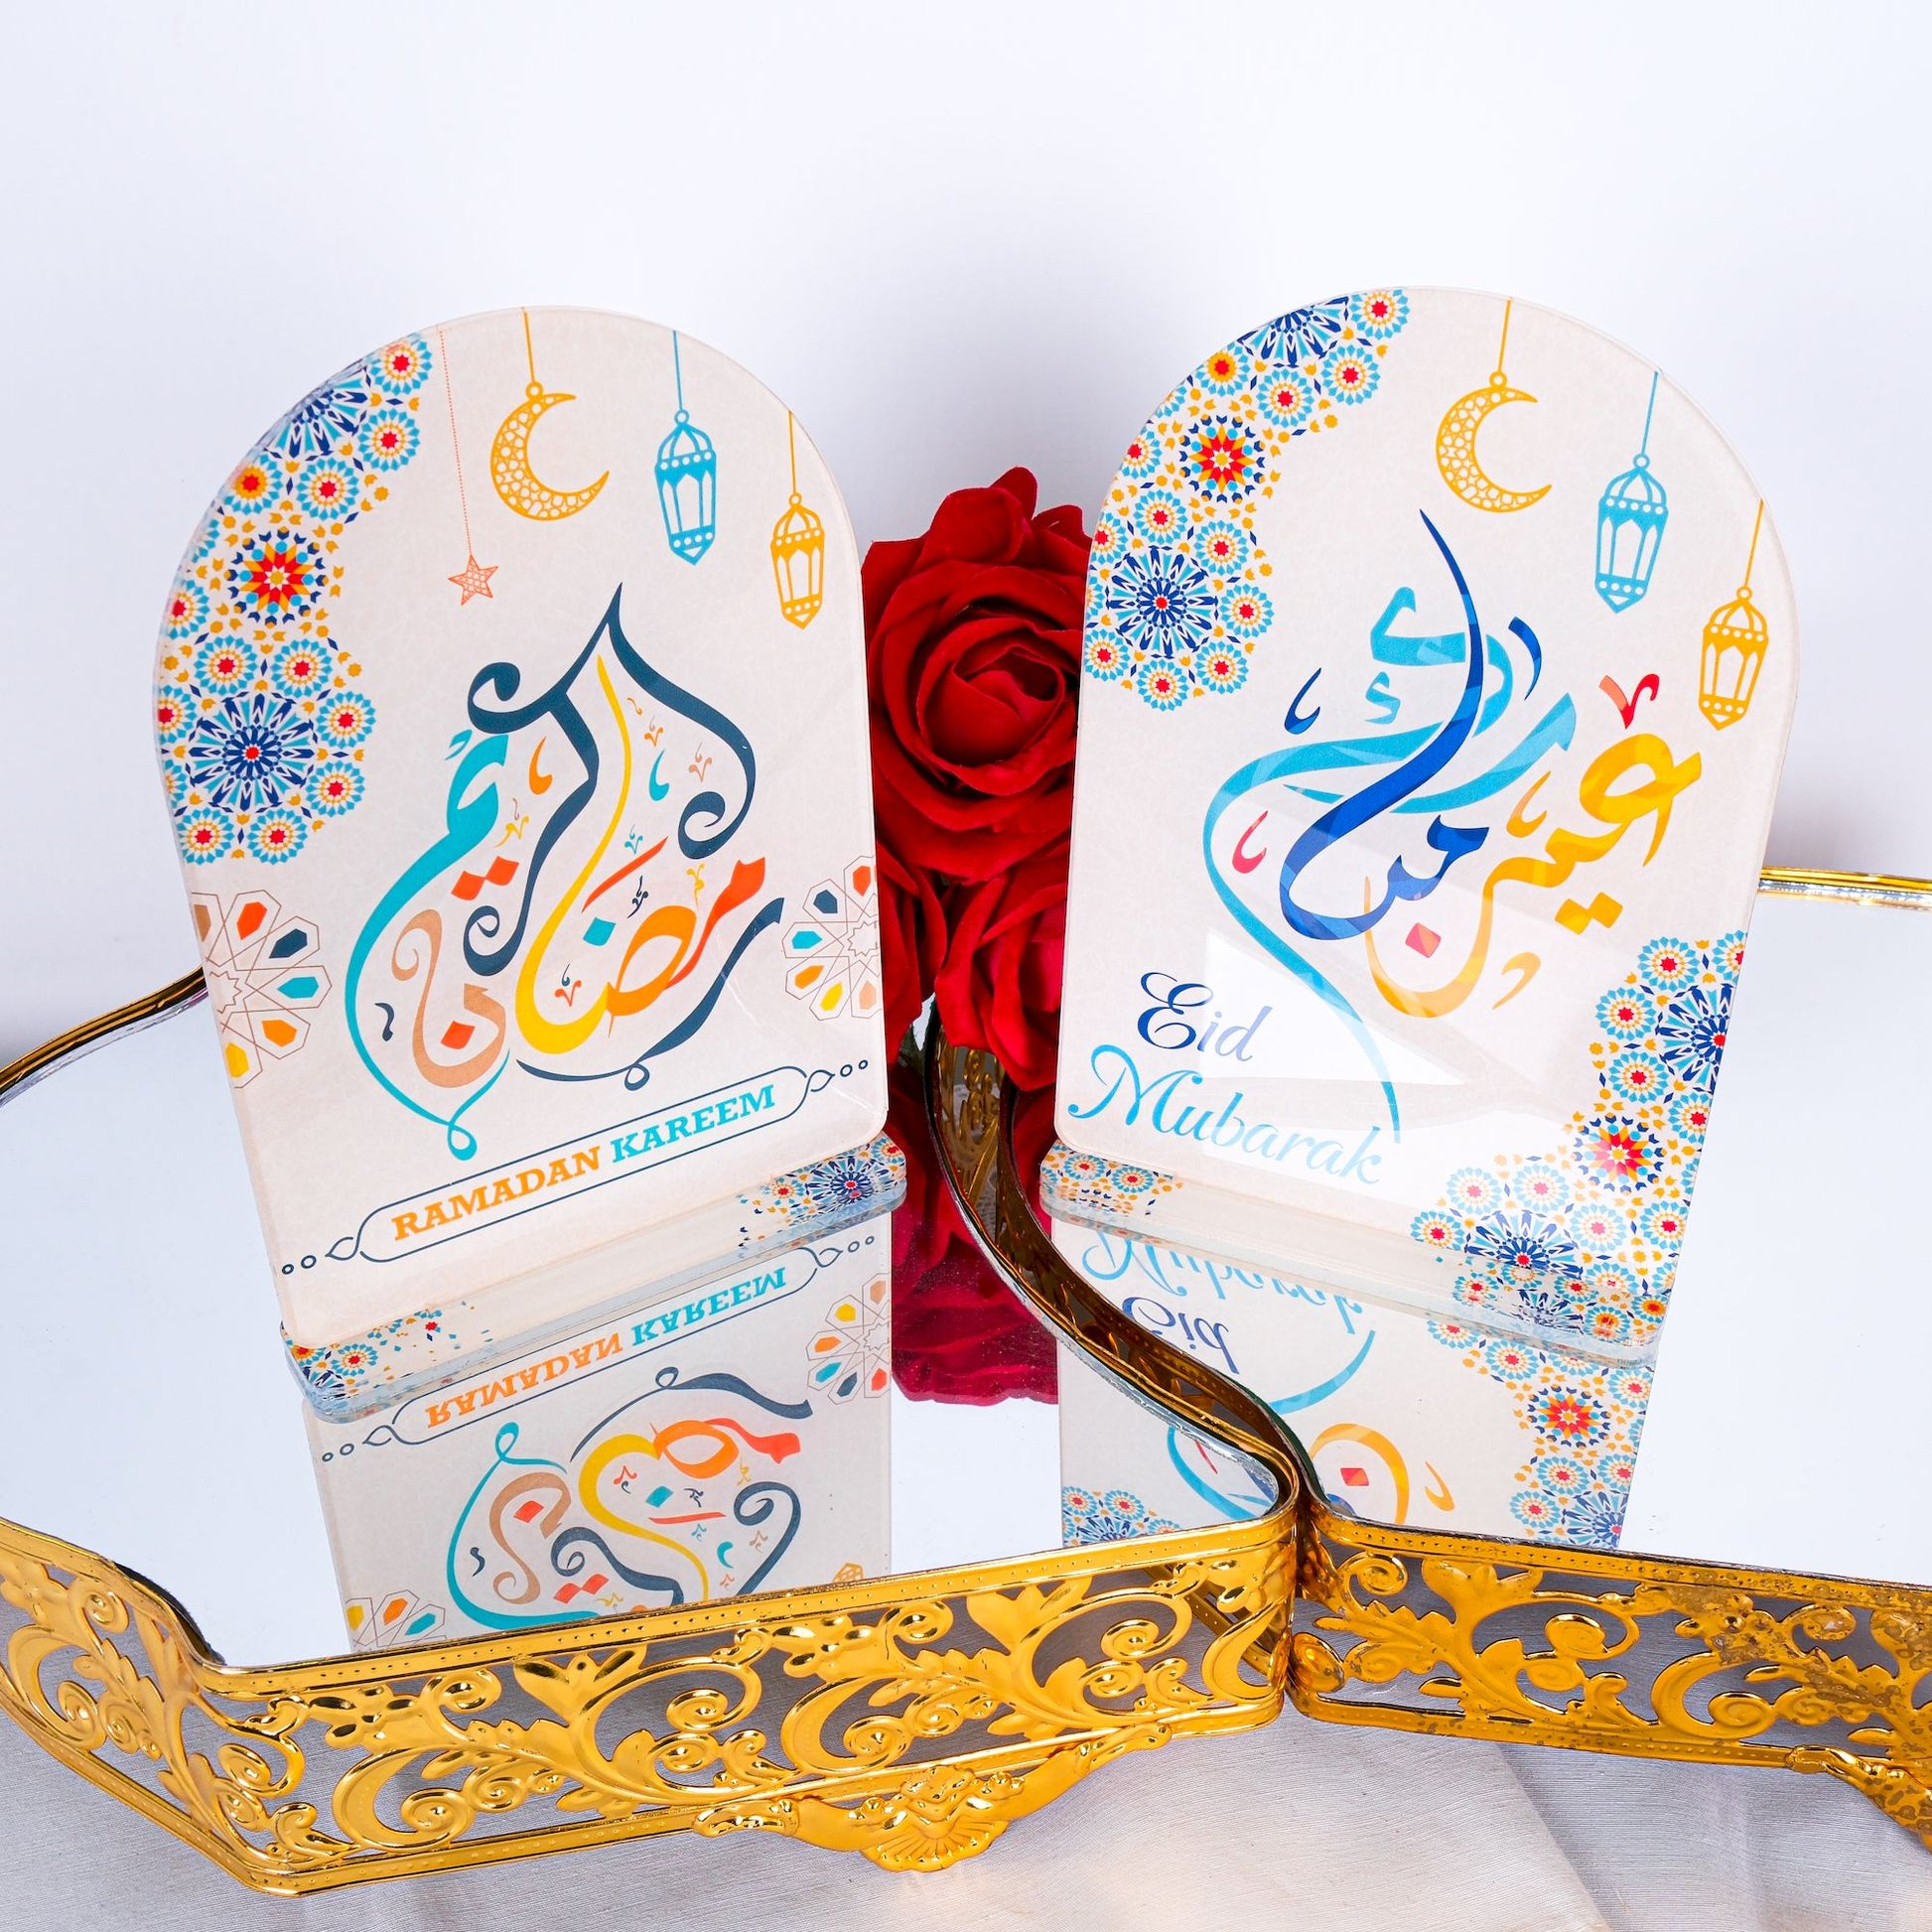 Ramadan Table Decor Islamic Art Favor Tabletop Sign Stand Muslim Gift - Islamic Elite Favors is a handmade gift shop offering a wide variety of unique and personalized gifts for all occasions. Whether you're looking for the perfect Ramadan, Eid, Hajj, wedding gift or something special for a birthday, baby shower or anniversary, we have something for everyone. High quality, made with love.